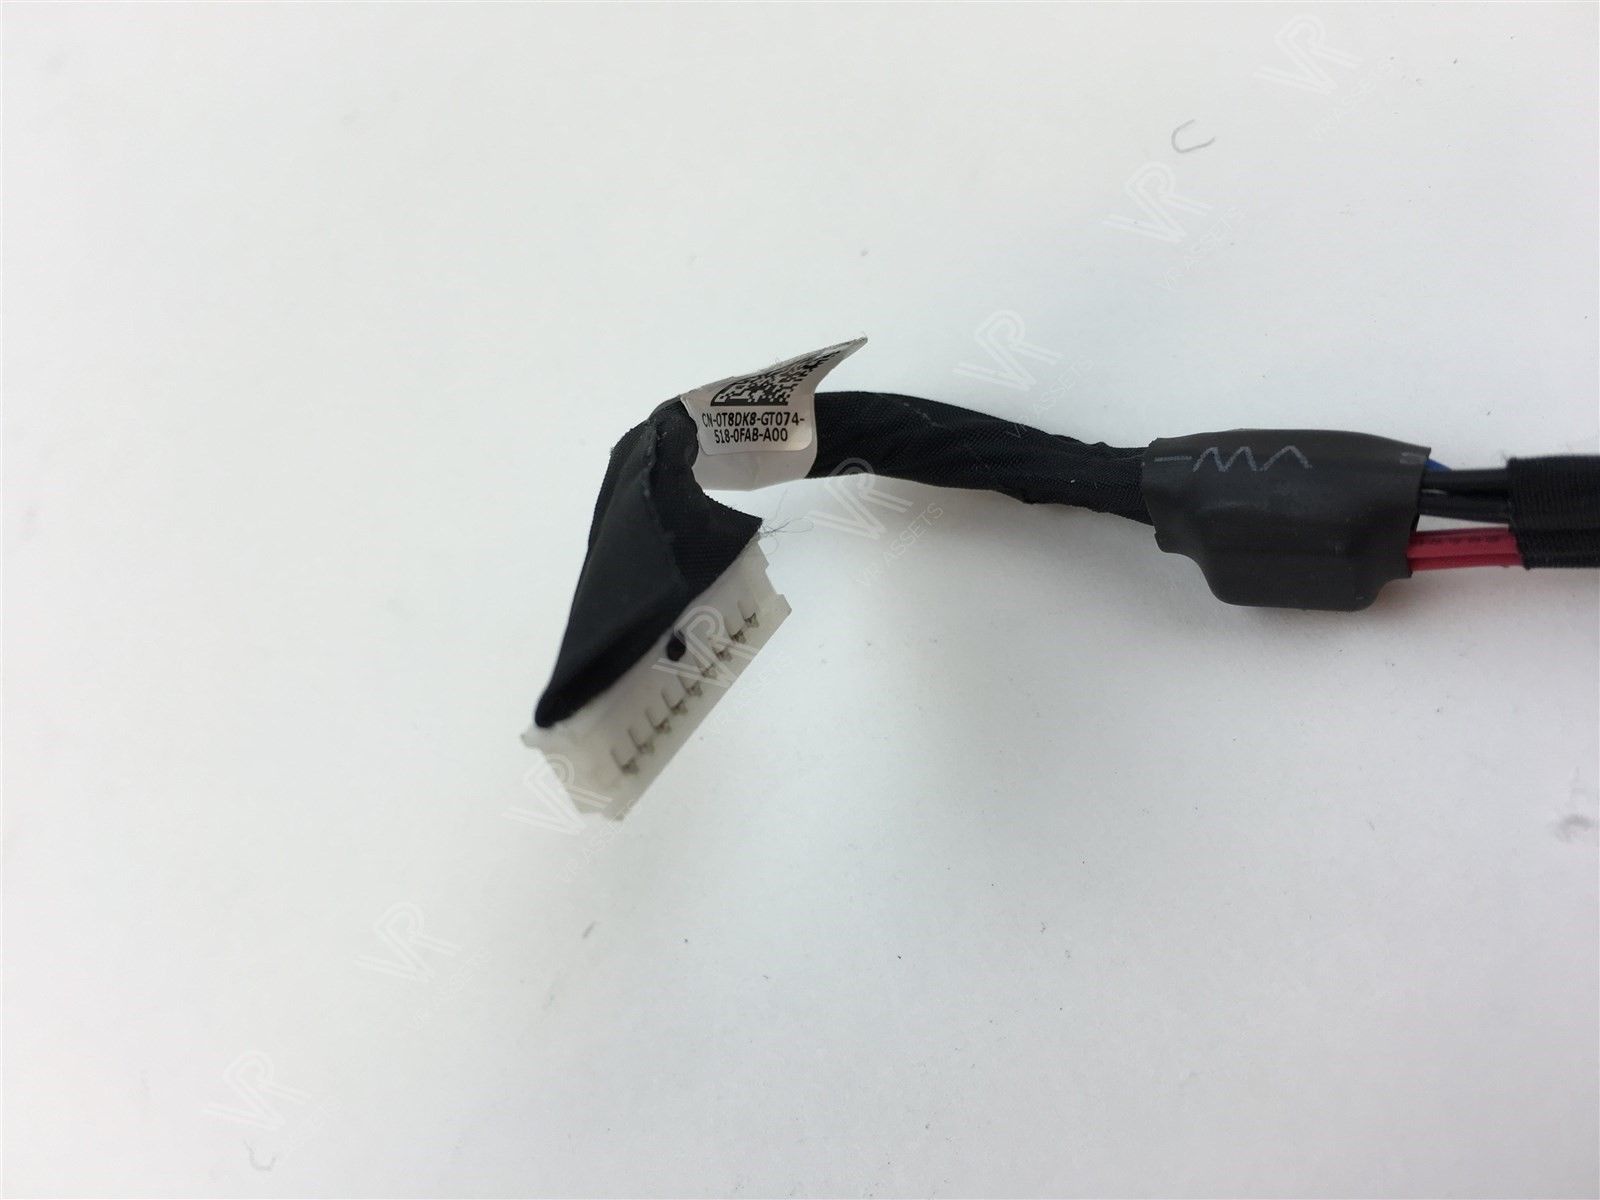 Genuine Dell Alienware 17 R2 DC Power Jack Harness Cable Assembly T8DK8 0T8DK8